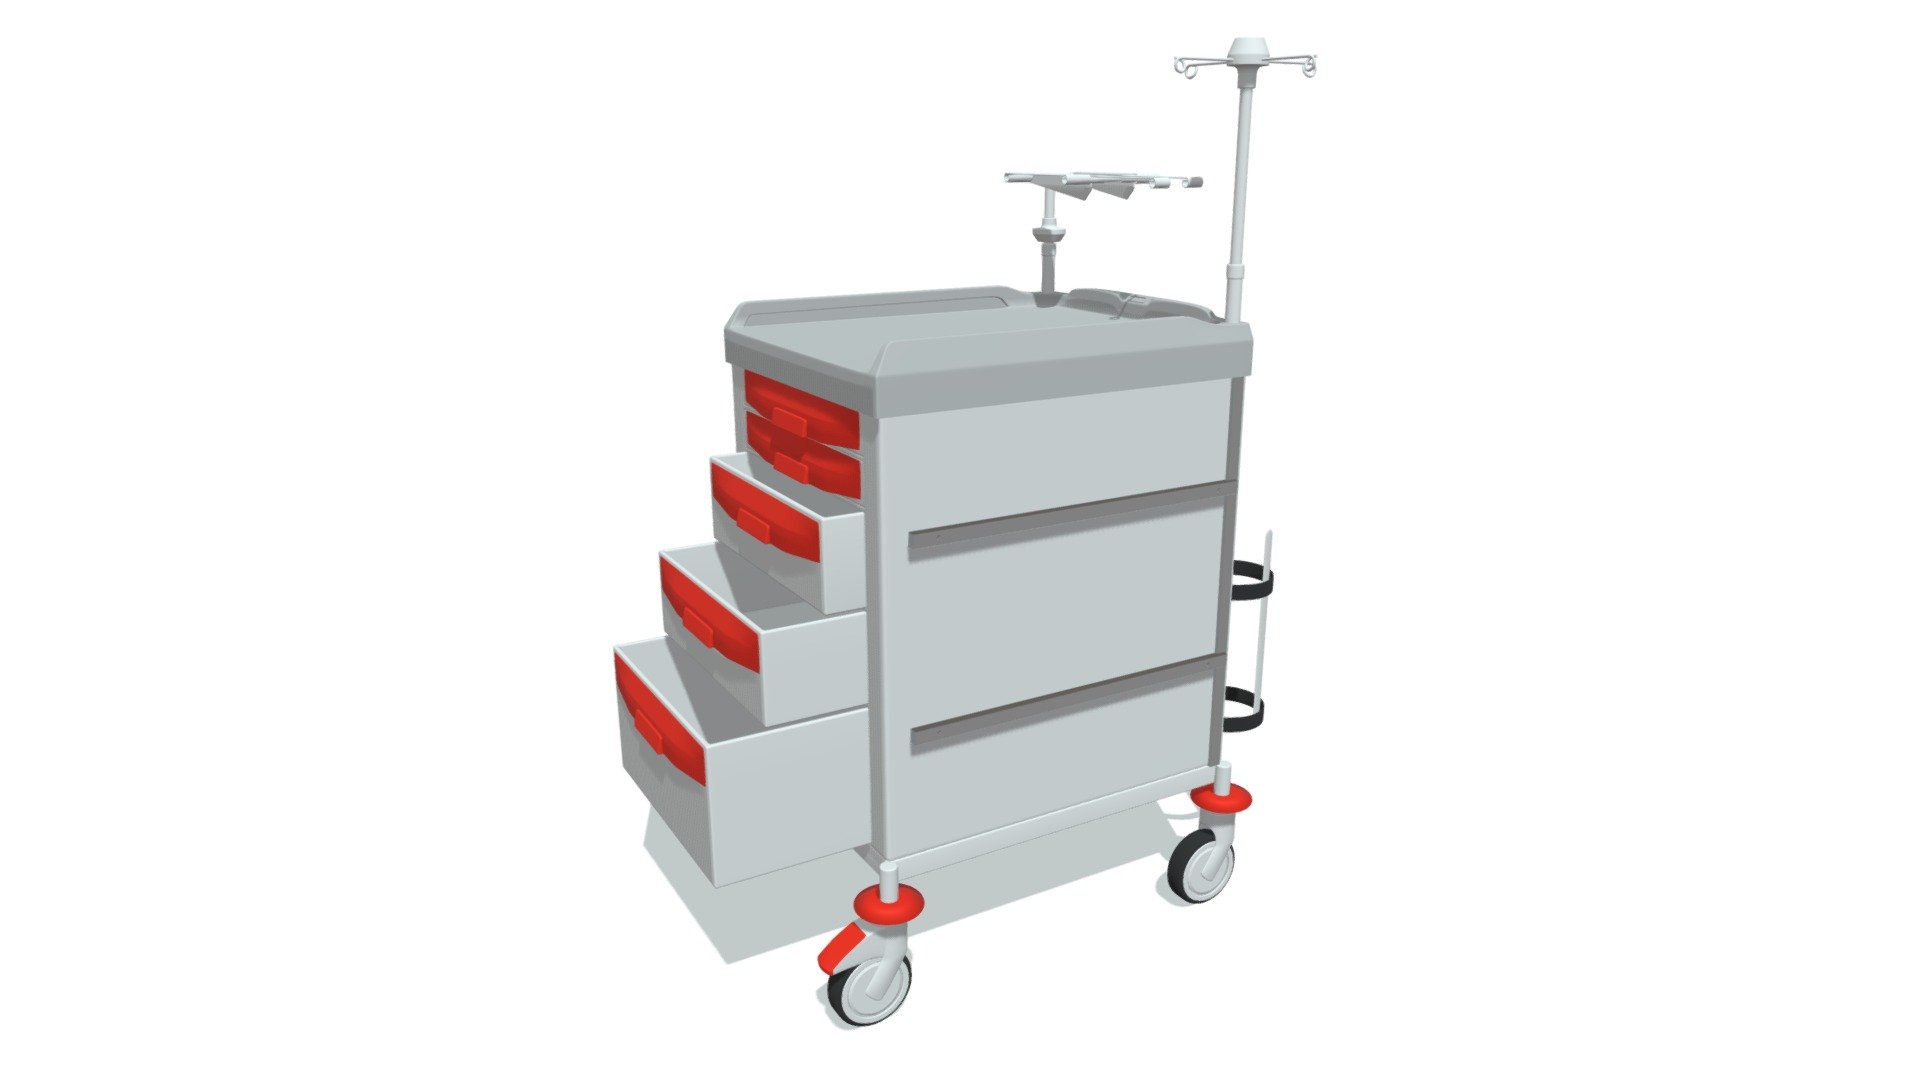 High quality 3d model of cleaning trolley 3d model